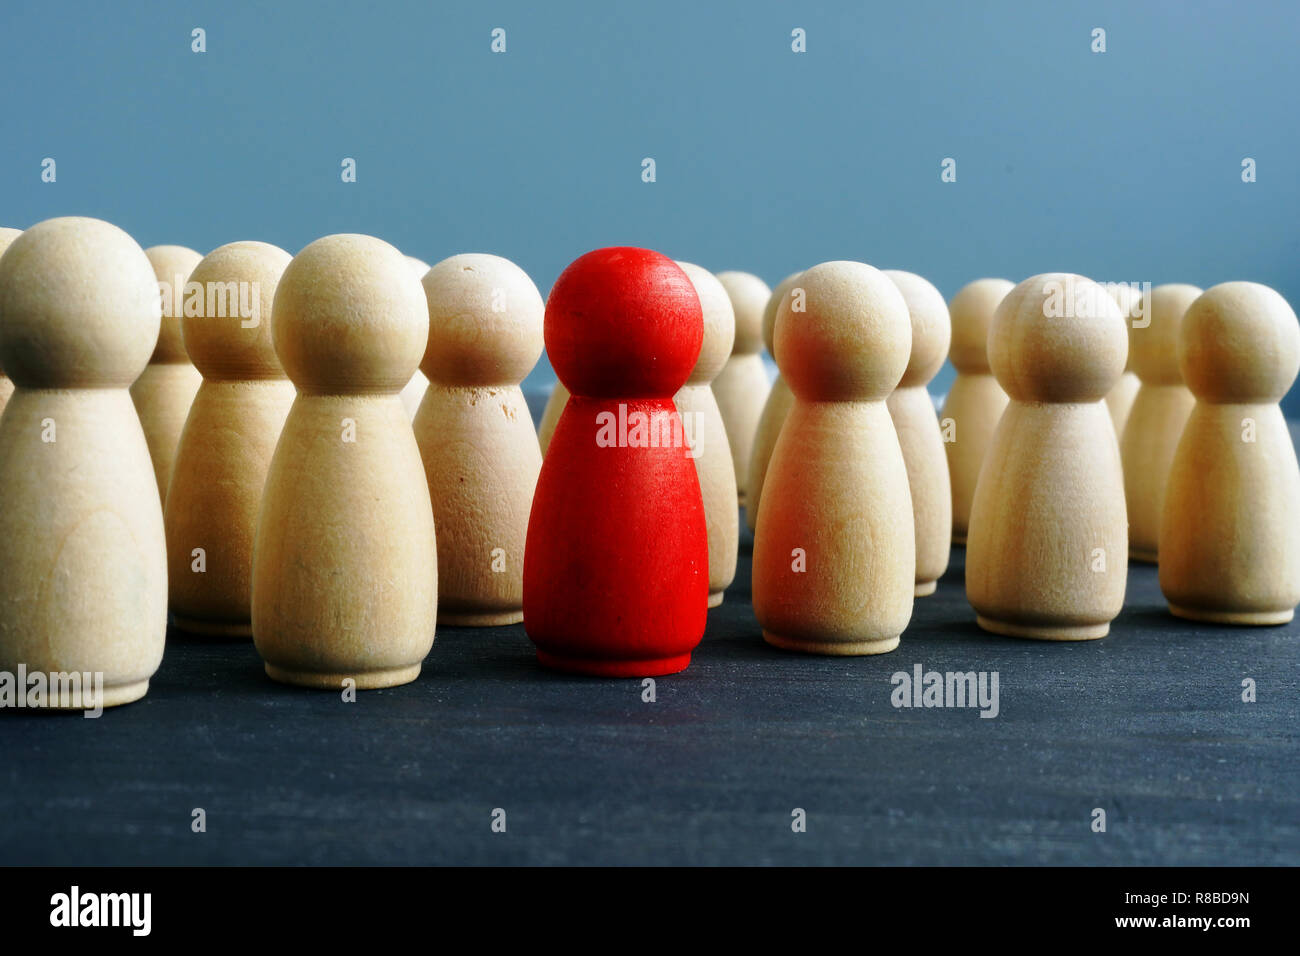 Difference, dissimilarity and distinctness concept. Wooden figures on a desk. Stock Photo